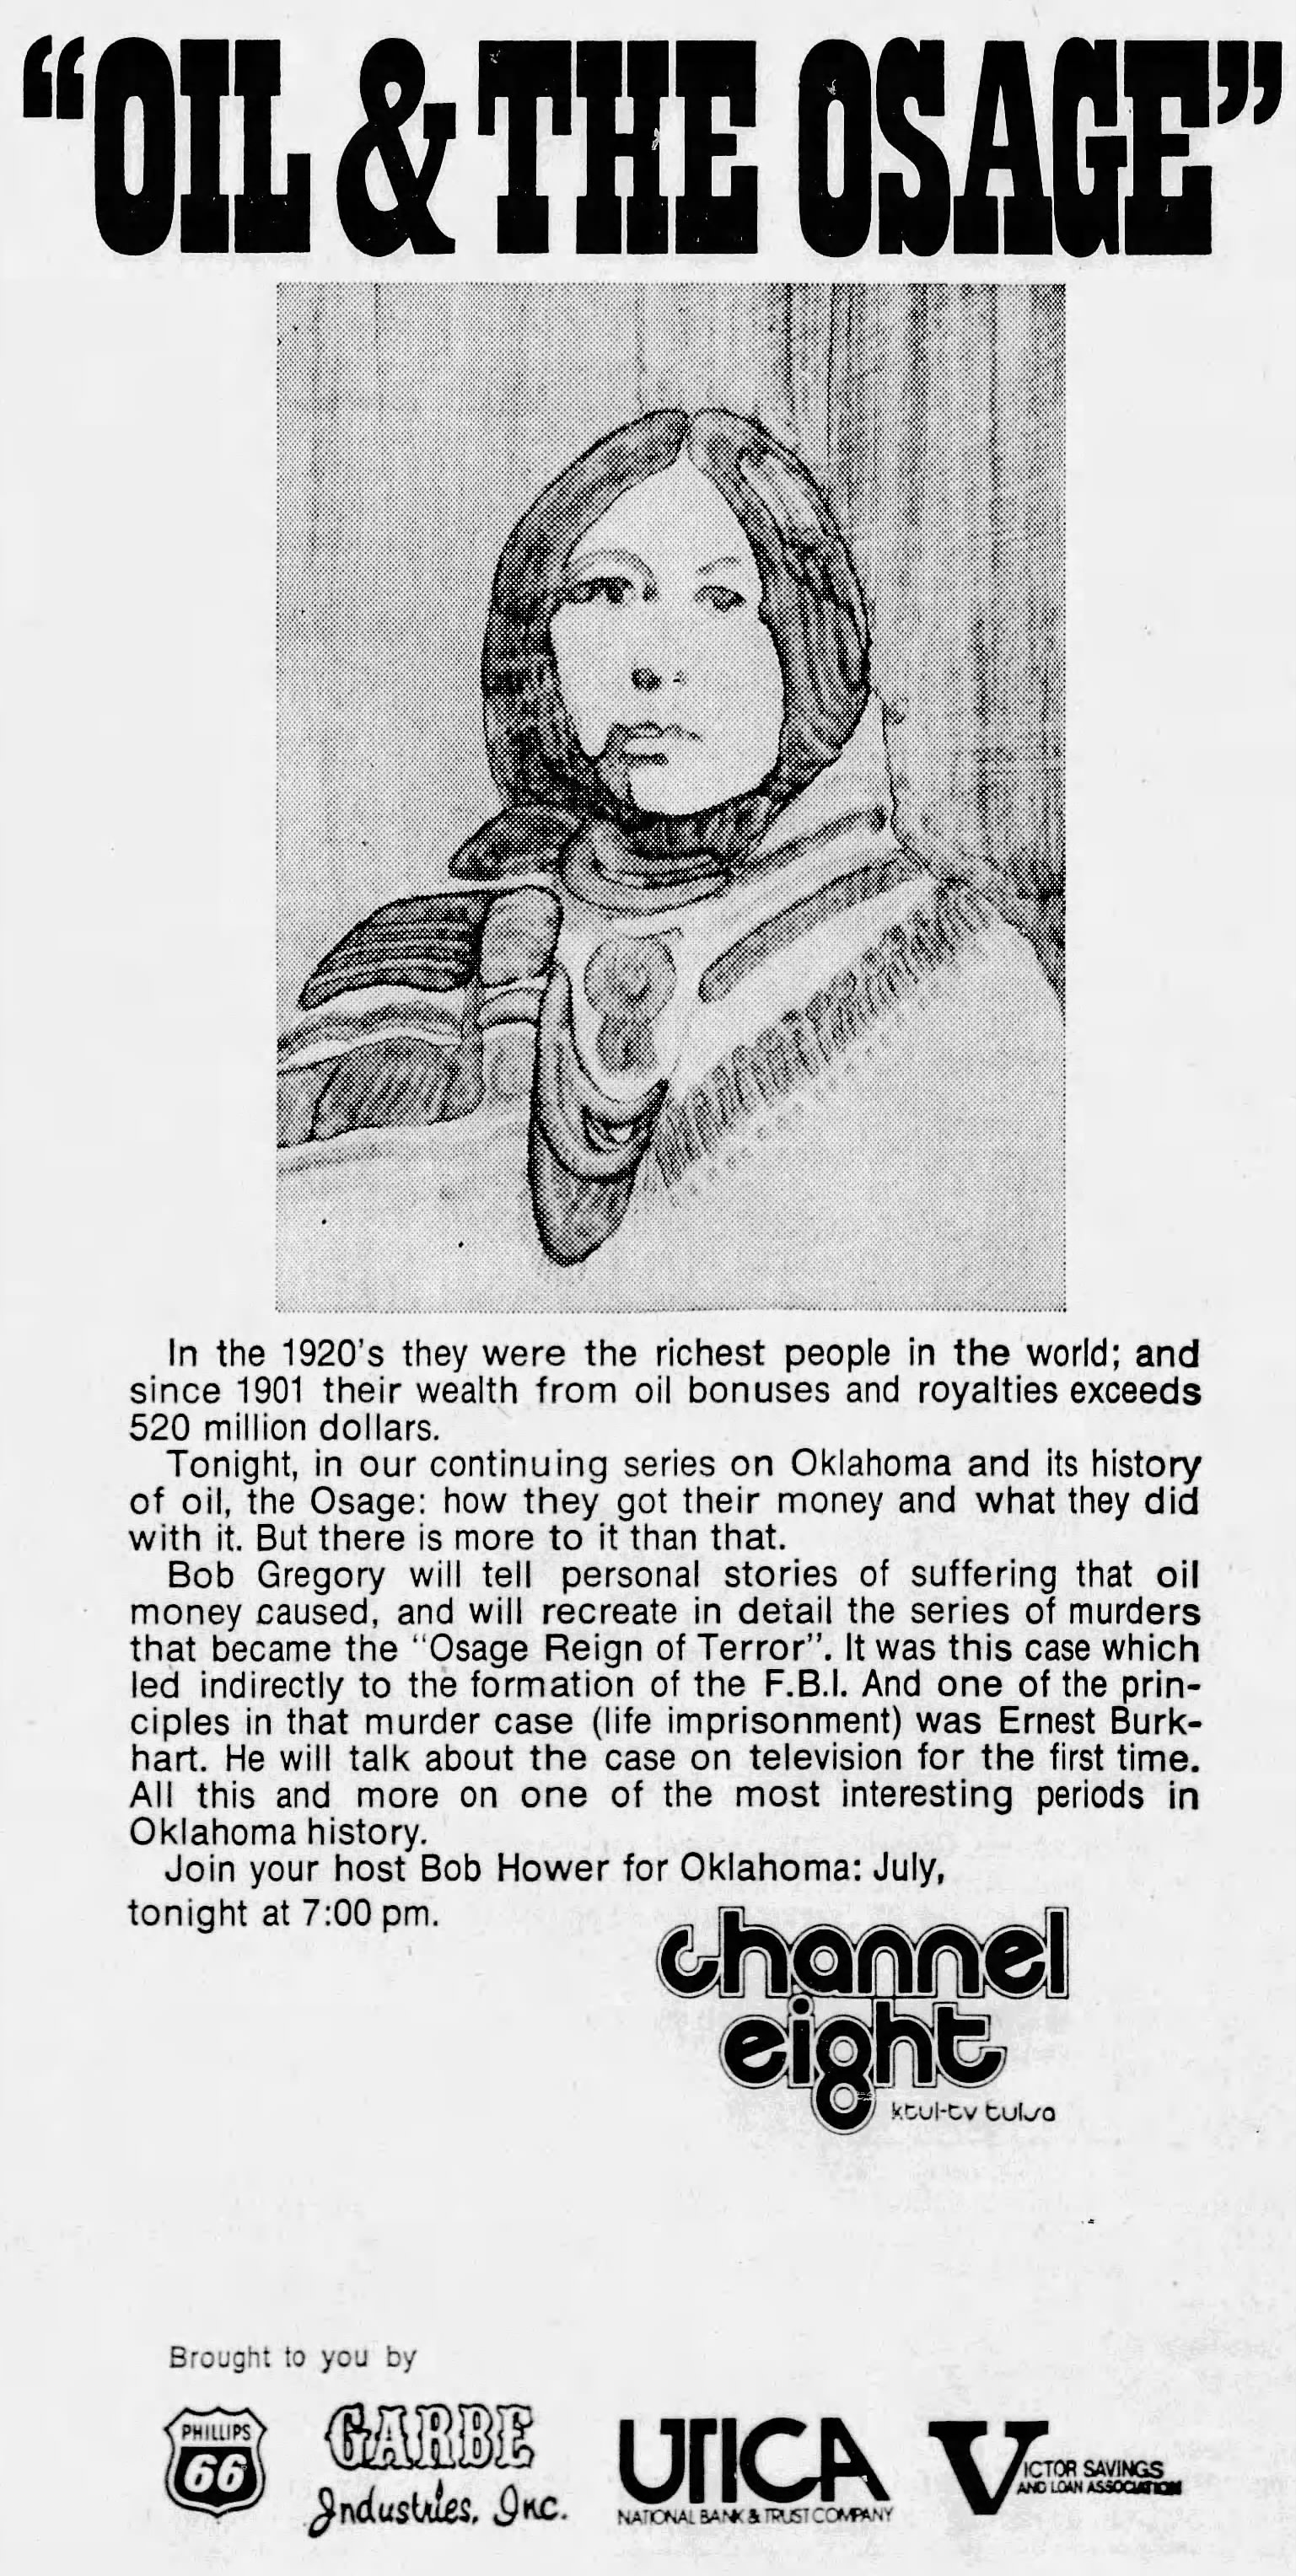 July 30, 1973, KTUL display ad for Oil in Oklahoma episode on the Osage Reign of Terror